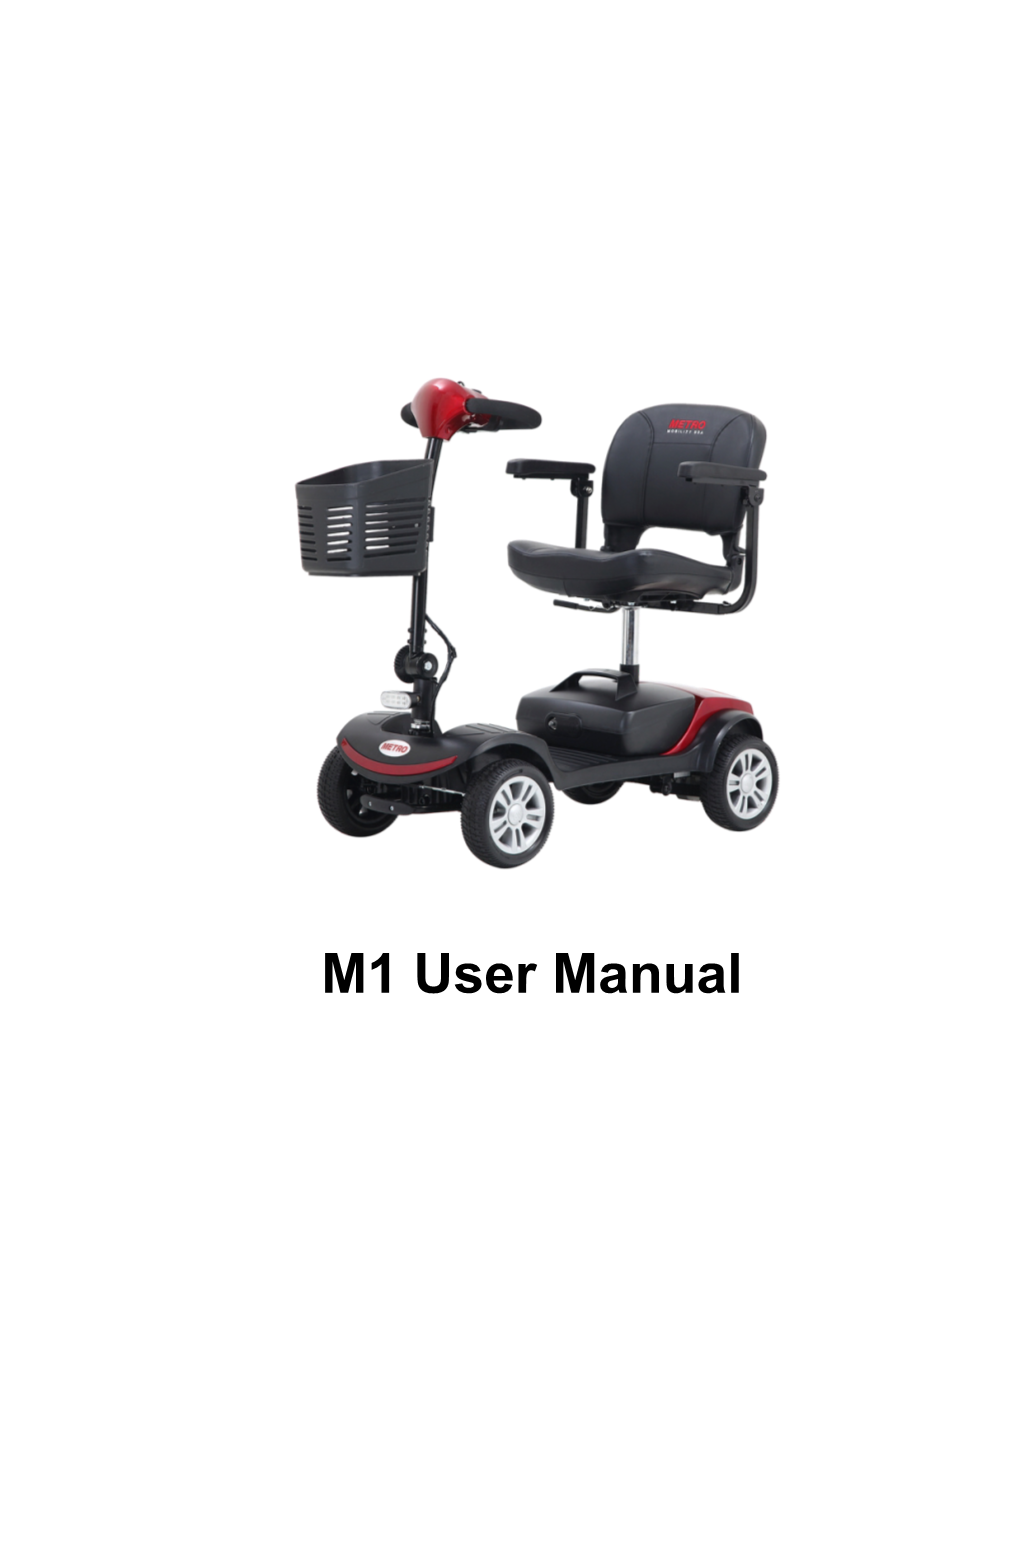 M1 User Manual How to Use This Manual